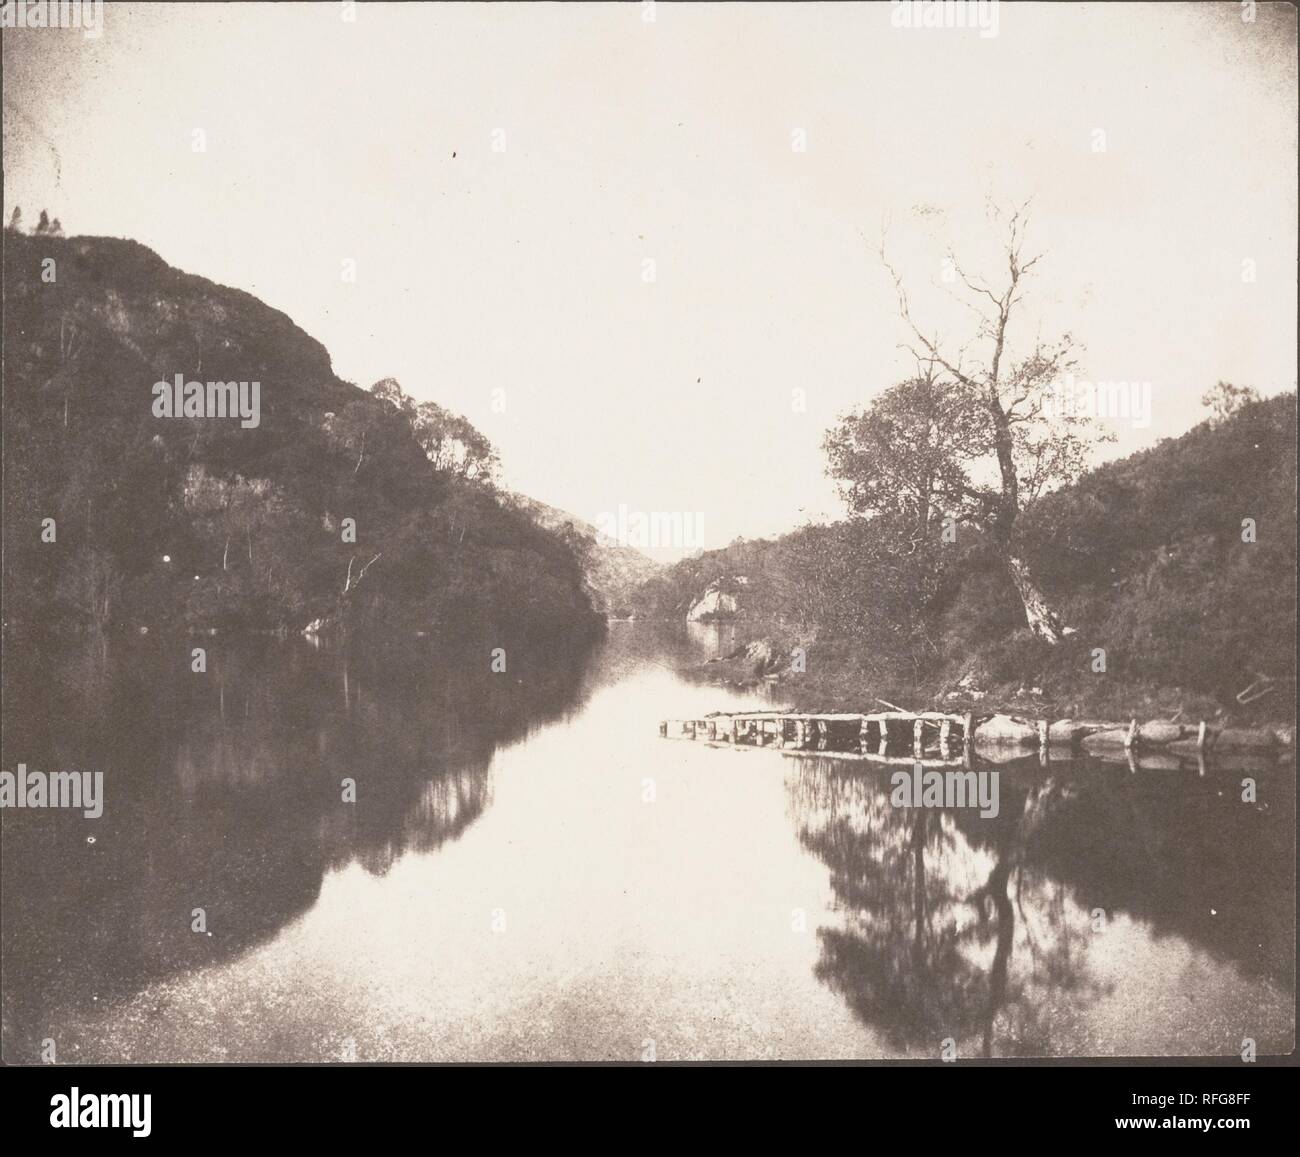 Loch Katrine Pier, Scene of the Lady of the Lake. Artist: William Henry Fox Talbot (British, Dorset 1800-1877 Lacock). Dimensions: Image: 17.5 x 21.1 cm (6 7/8 x 8 5/16 in.)  Sheet: 18.4 x 22.9 cm (7 1/4 x 9 in.). Date: October 1844.  Talbot, the quintessential gentleman amateur, took on a professional role in the publication of  two books illustrated with photographs: 'The Pencil of Nature', a general introduction to his invention, and 'Sun Pictures in Scotland', a tour of the scenery made popular by the novels of Sir Walter Scott.  This well-preserved print of Loch Katrine, perhaps the most  Stock Photo